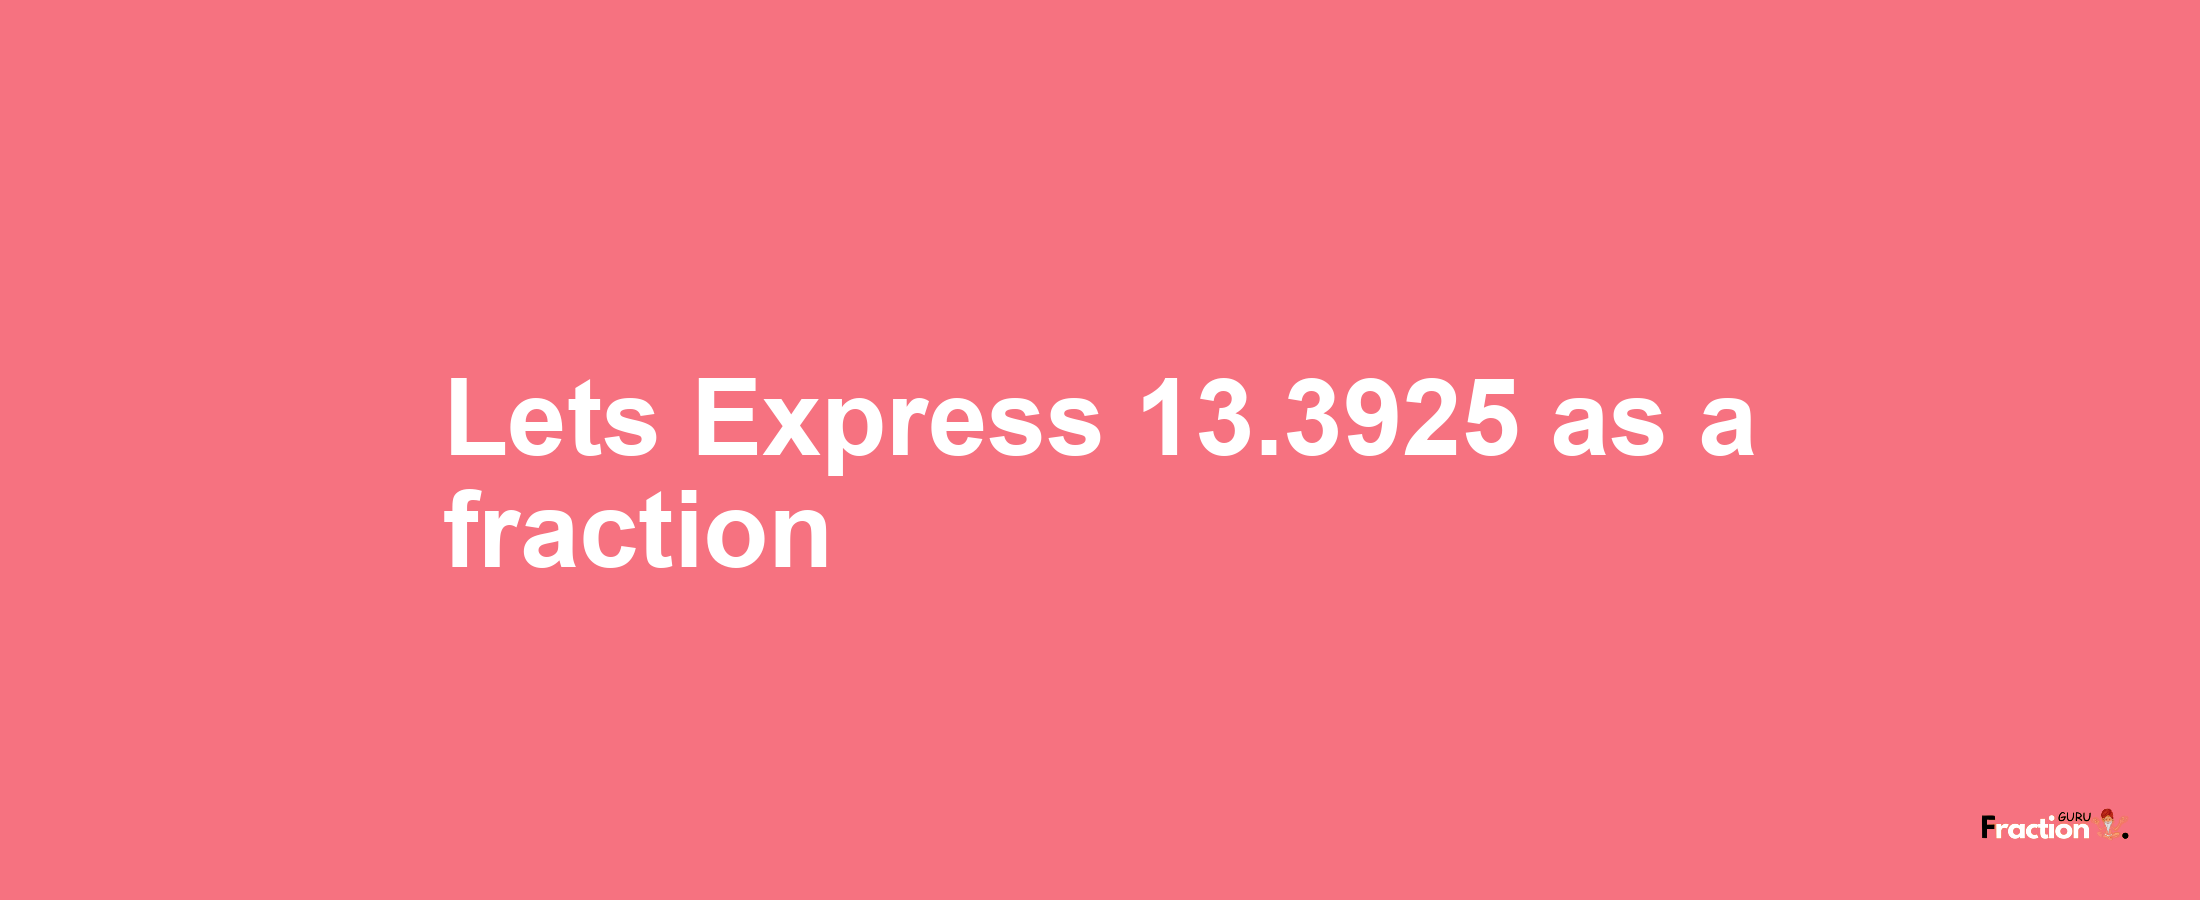 Lets Express 13.3925 as afraction